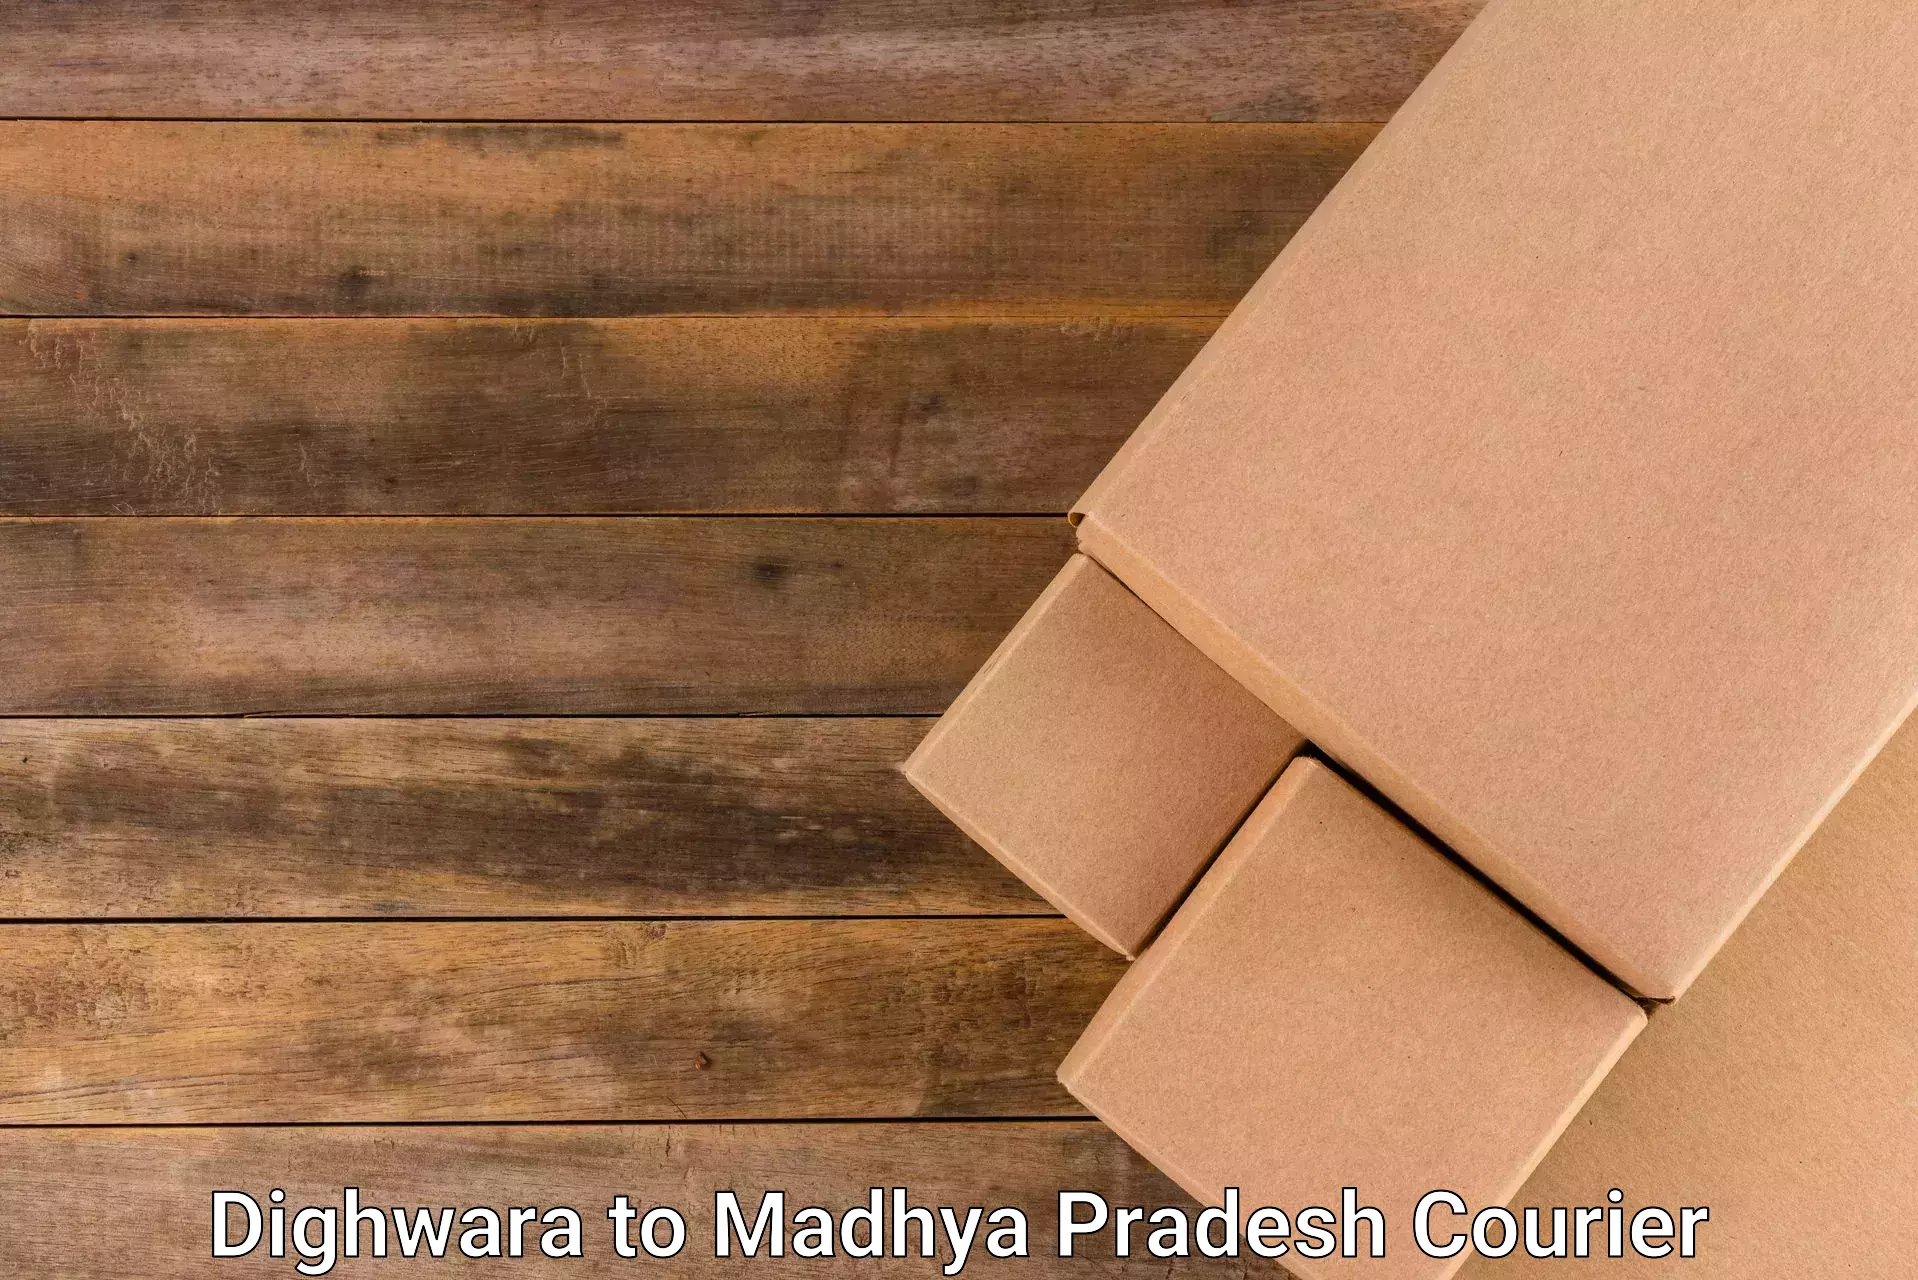 State-of-the-art courier technology Dighwara to IIT Indore